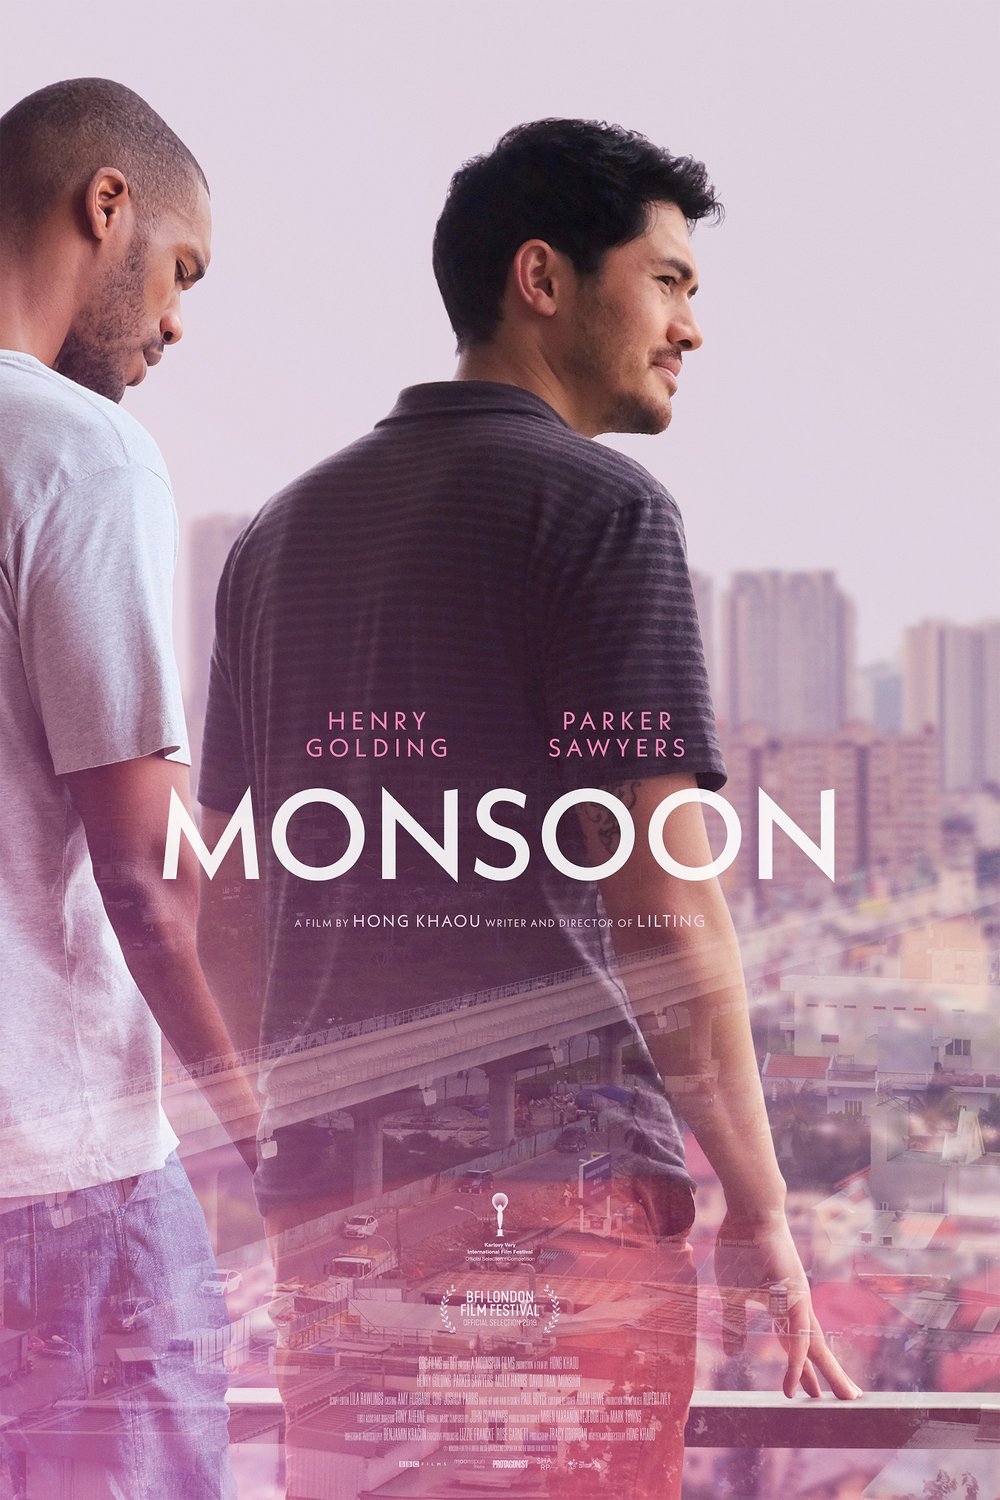 Poster of the movie Monsoon